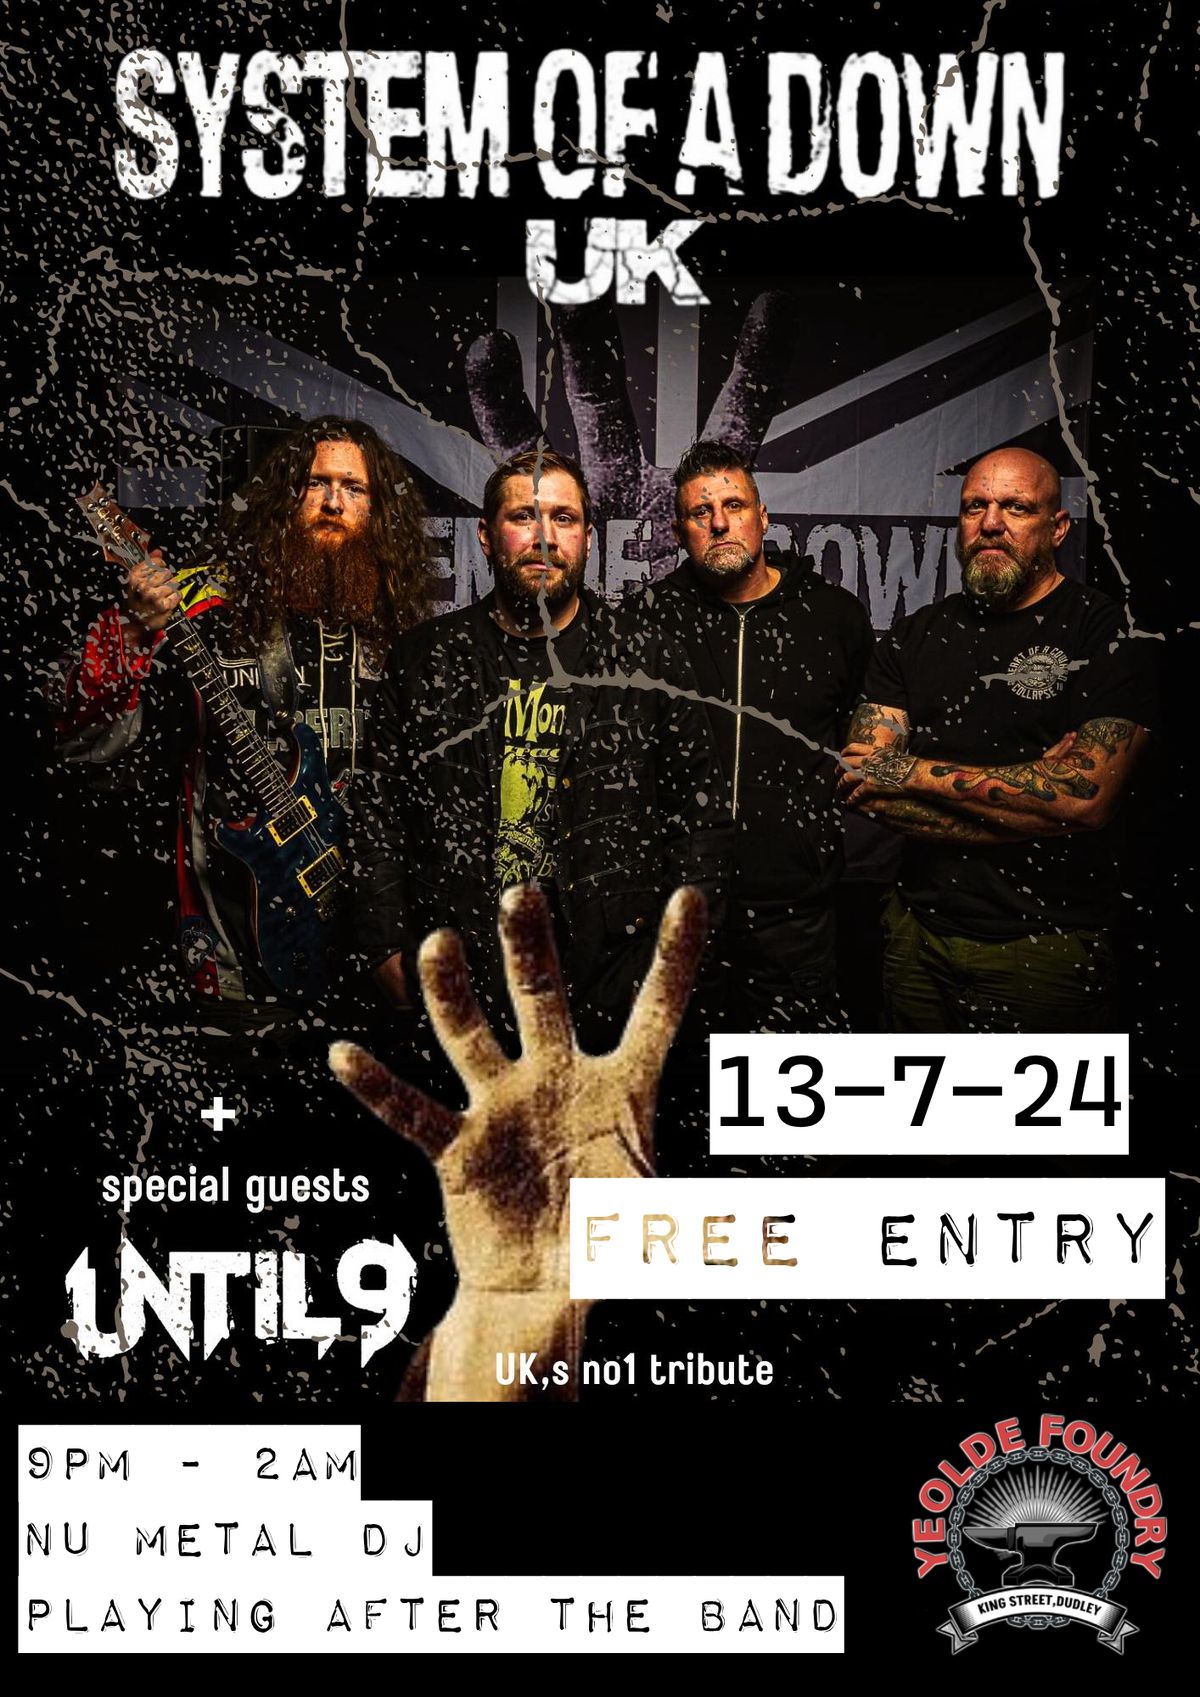 SYSTEM OF A DOWN TRIBUTE - Nu Metal DJ FREE ENTRY!